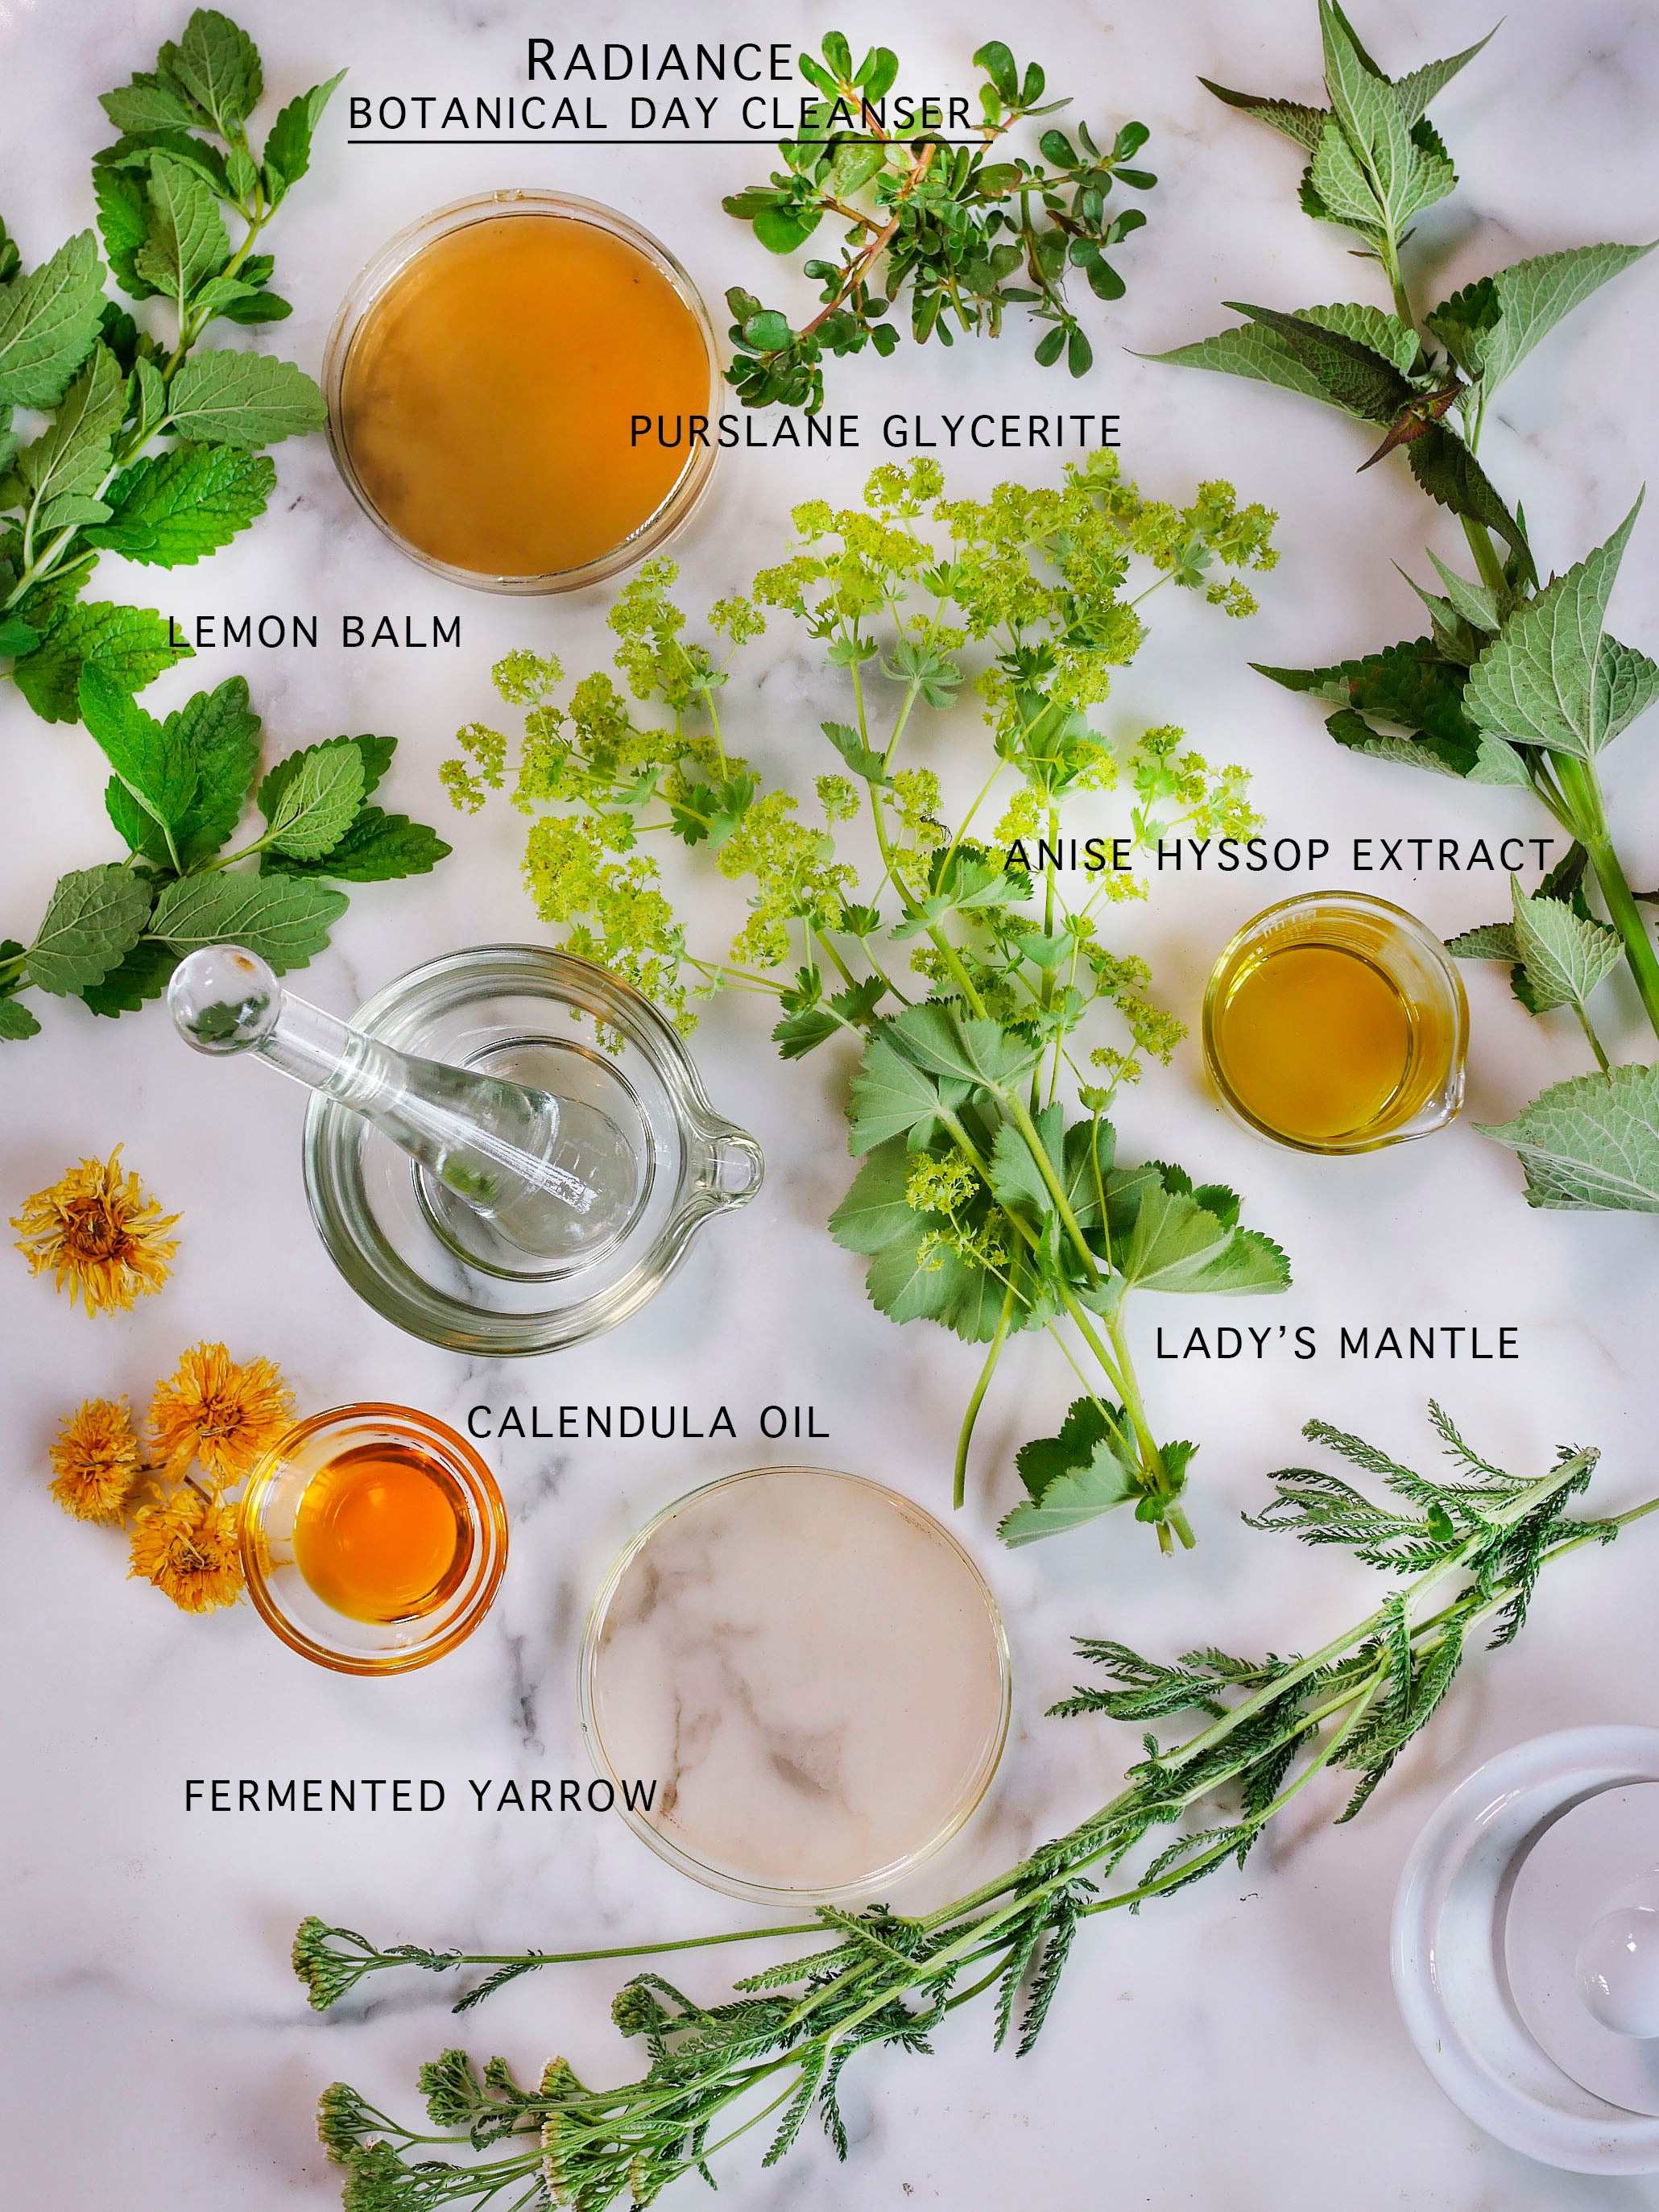 Botanical and non-toxic facial cleanser ingredients.